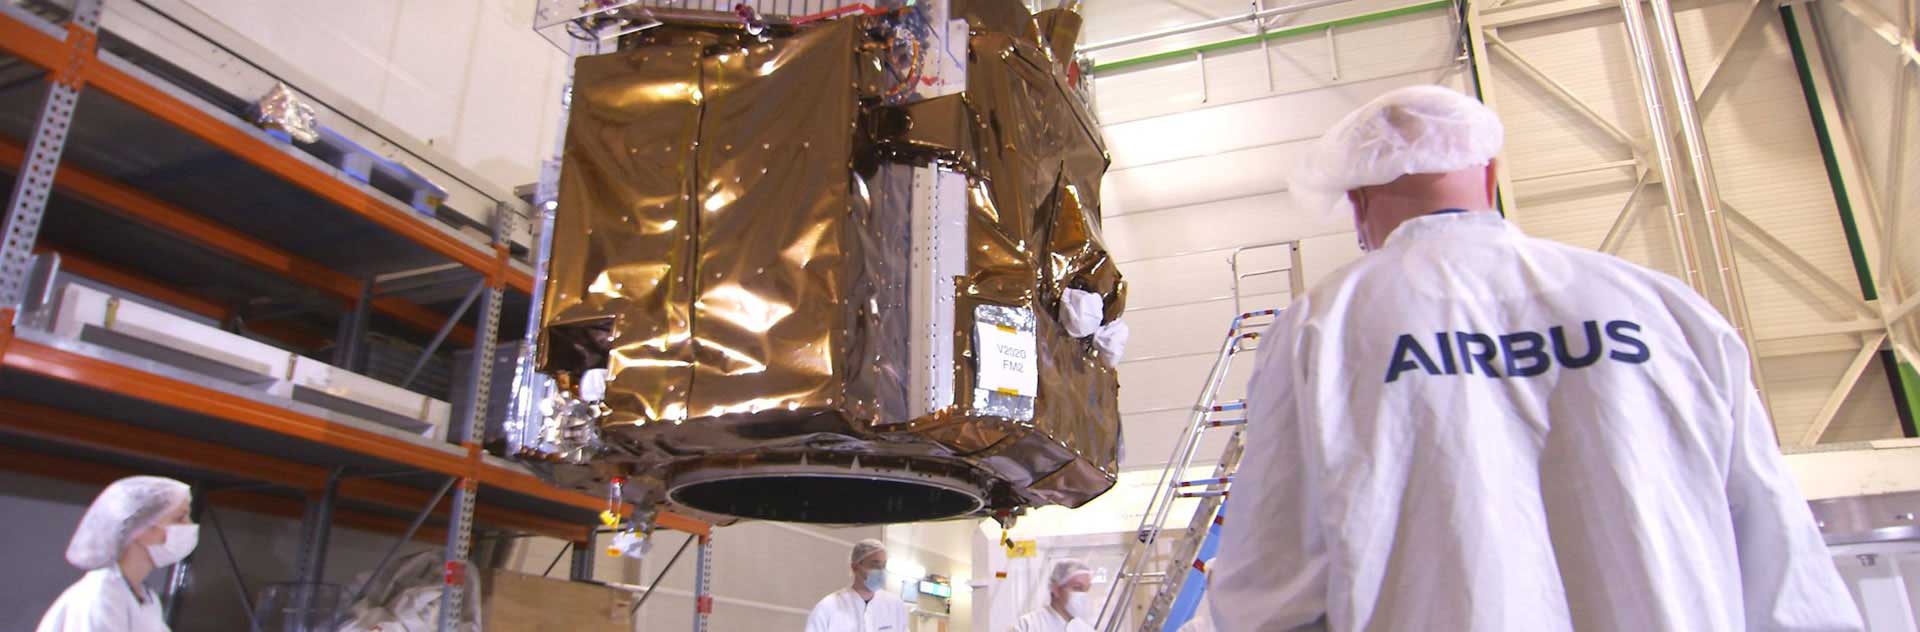 Scheduled to launch in April 2021 on a Vega launcher, the first of the new generation of very high-resolution satellites will join the existing Airbus fleet of optical and radar satellites, with increased resolution, revisit and coverage. It will be closely followed by its twin, also scheduled for launch on a Vega rocket a few weeks later.